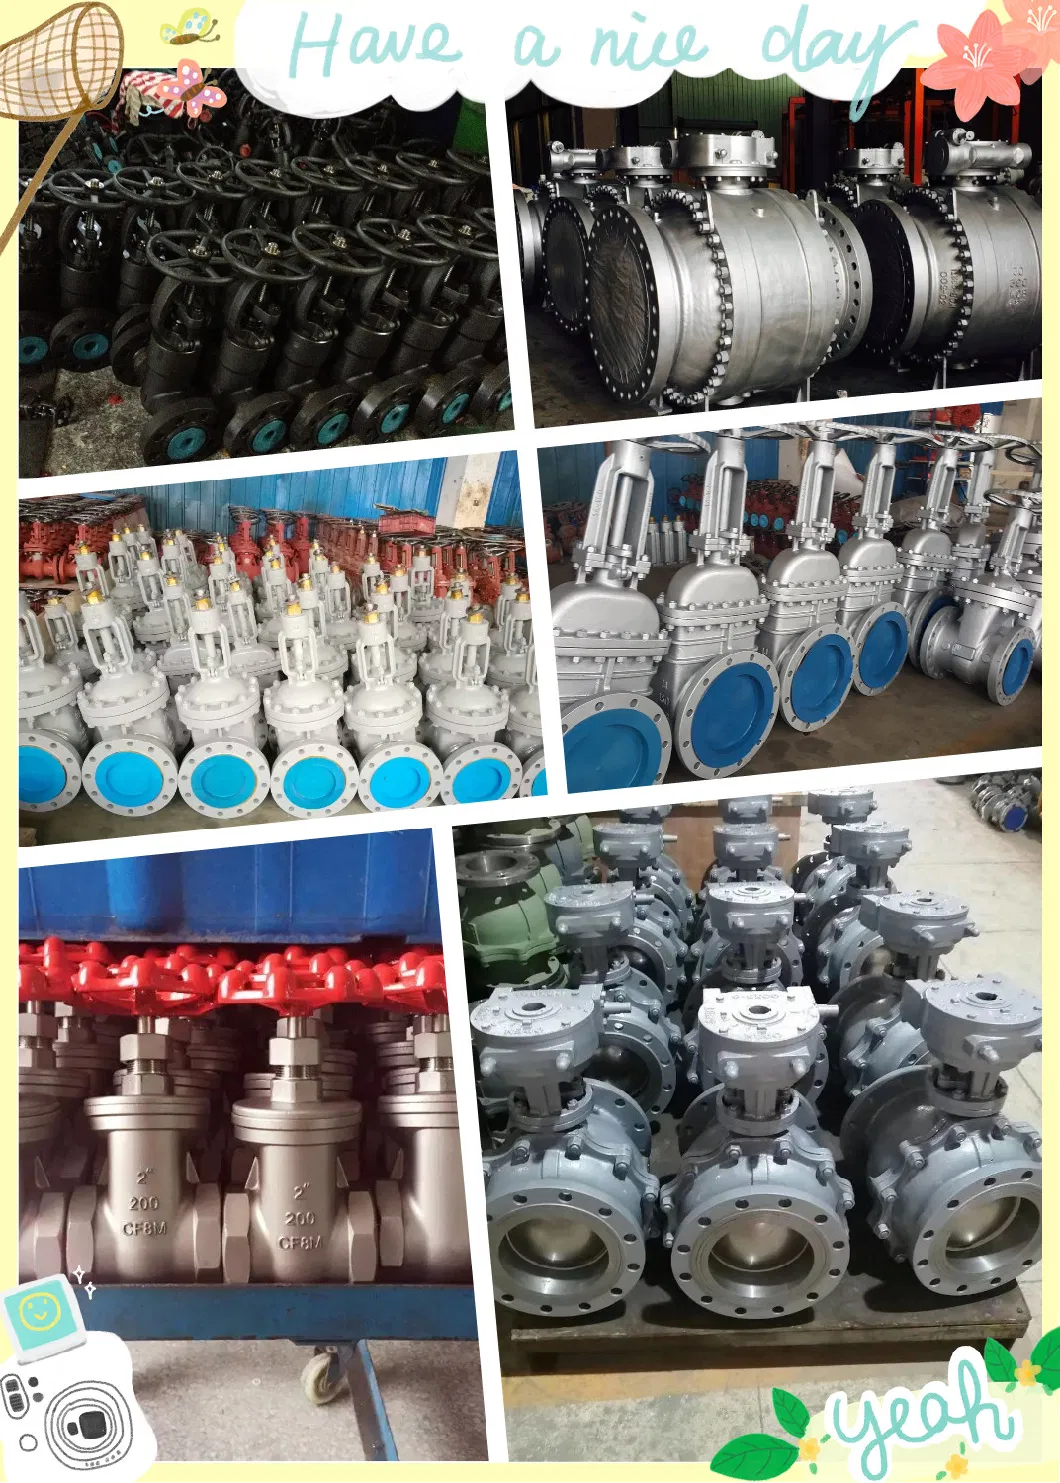 DIN//API600/GB Pn16 Wheel/Bevel Gear/Electric/Pneumatic Stainless Steel/Carbon Steel/CF8/Weld /Flange End OS&Y Wedge Industrial Non Rising Stem Gate Valve